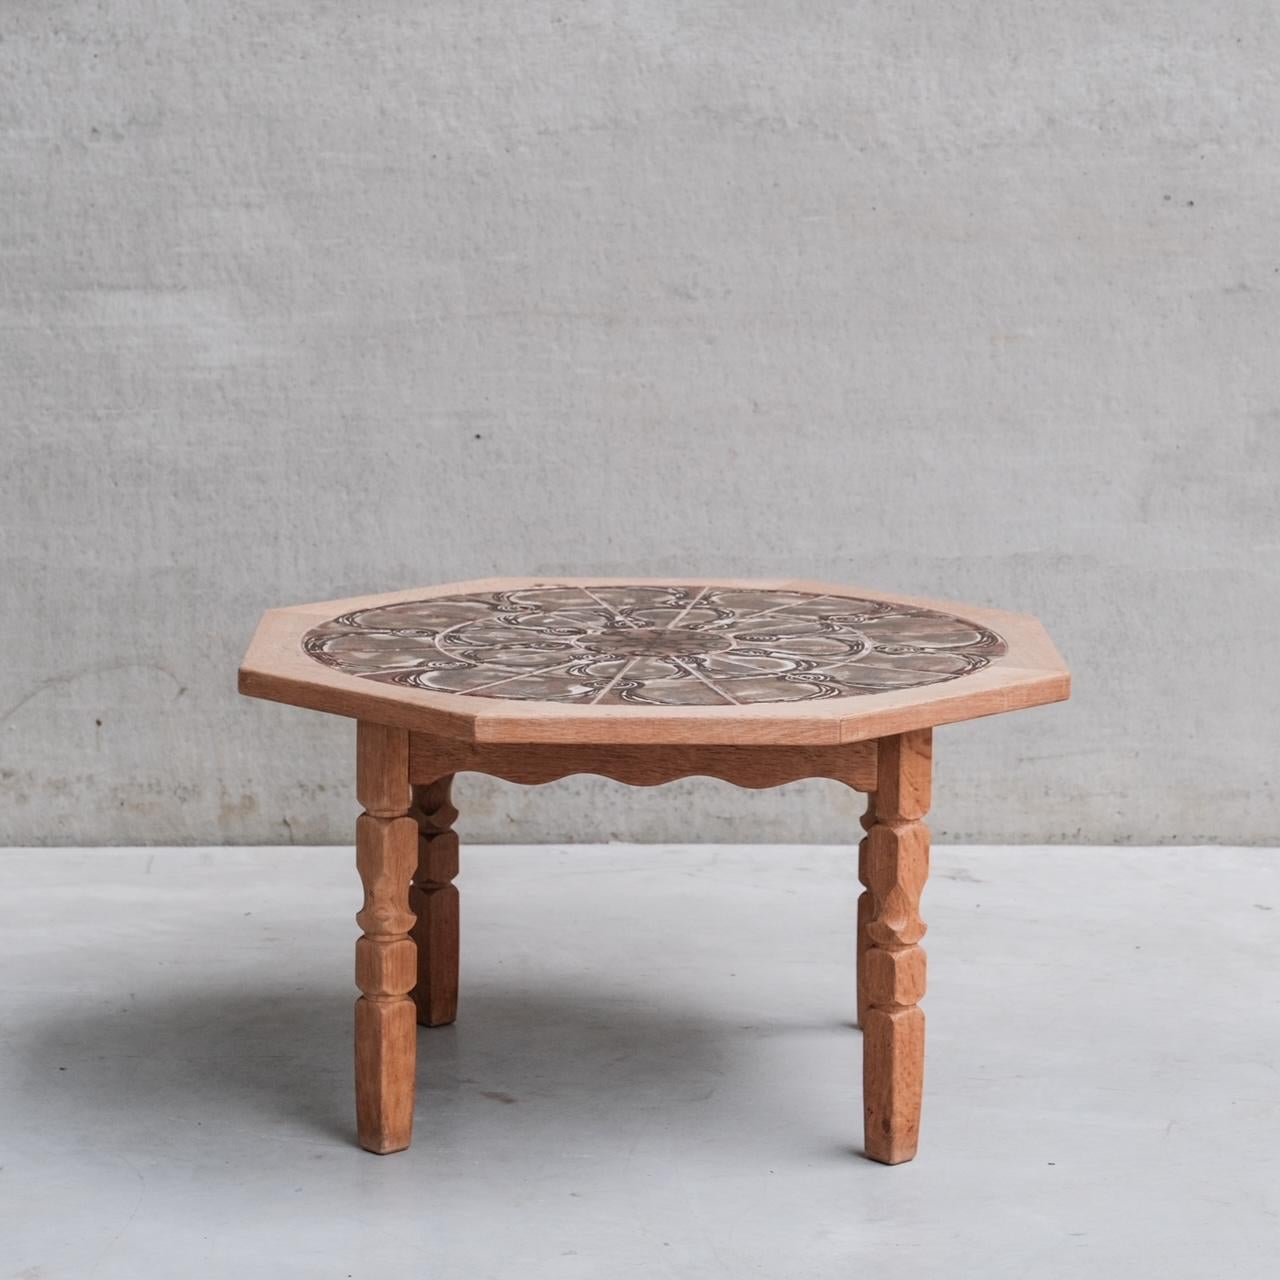 Danish Mid-Century Oak and Ceramic Tile Coffee Table In Good Condition For Sale In London, GB